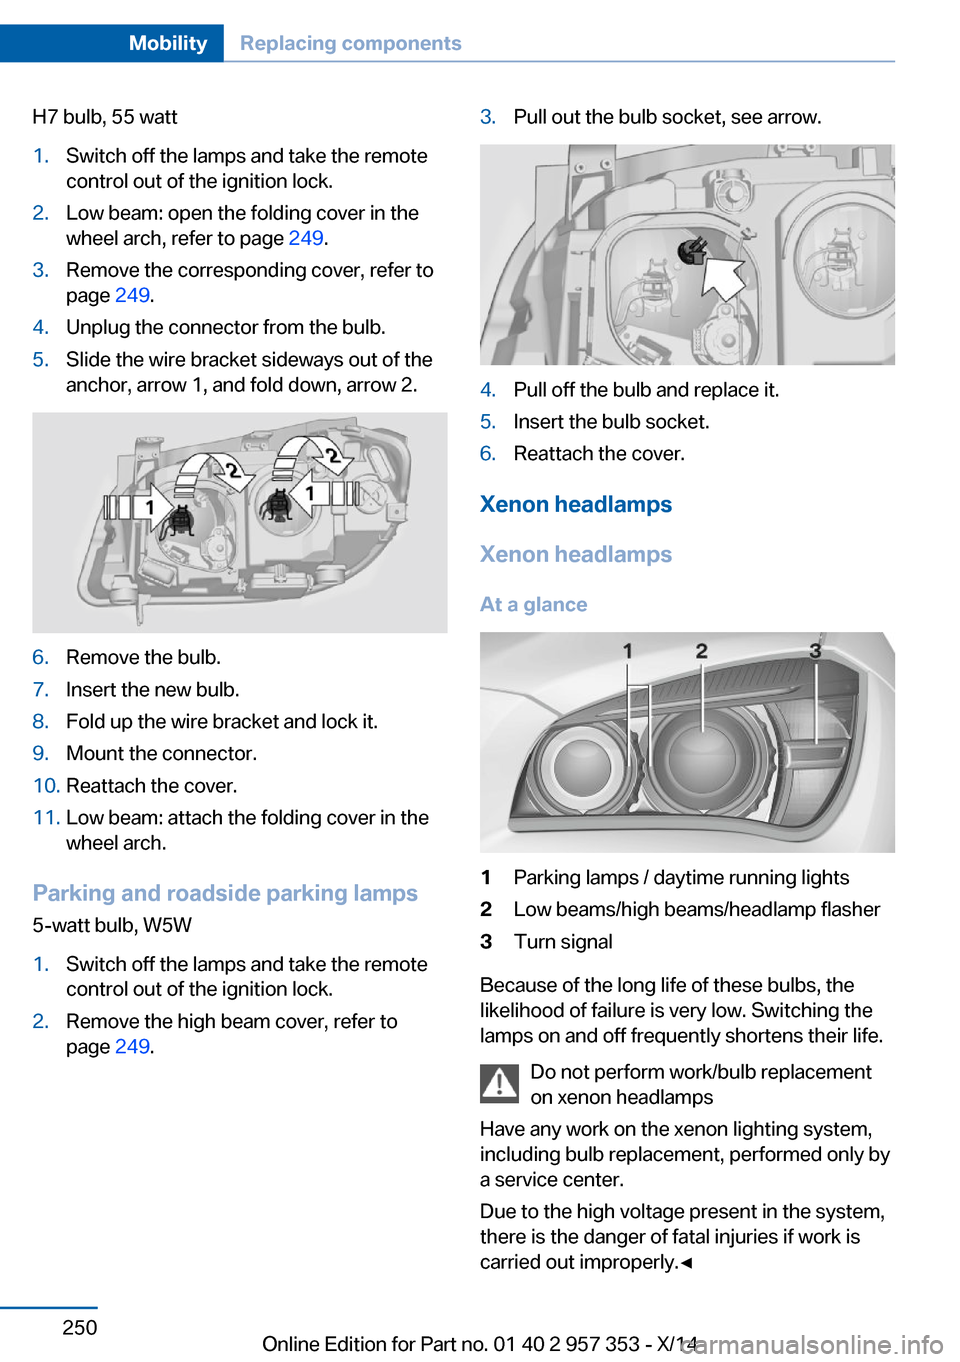 BMW X1 2014 E84 Service Manual H7 bulb, 55 watt1.Switch off the lamps and take the remote
control out of the ignition lock.2.Low beam: open the folding cover in the
wheel arch, refer to page  249.3.Remove the corresponding cover, r